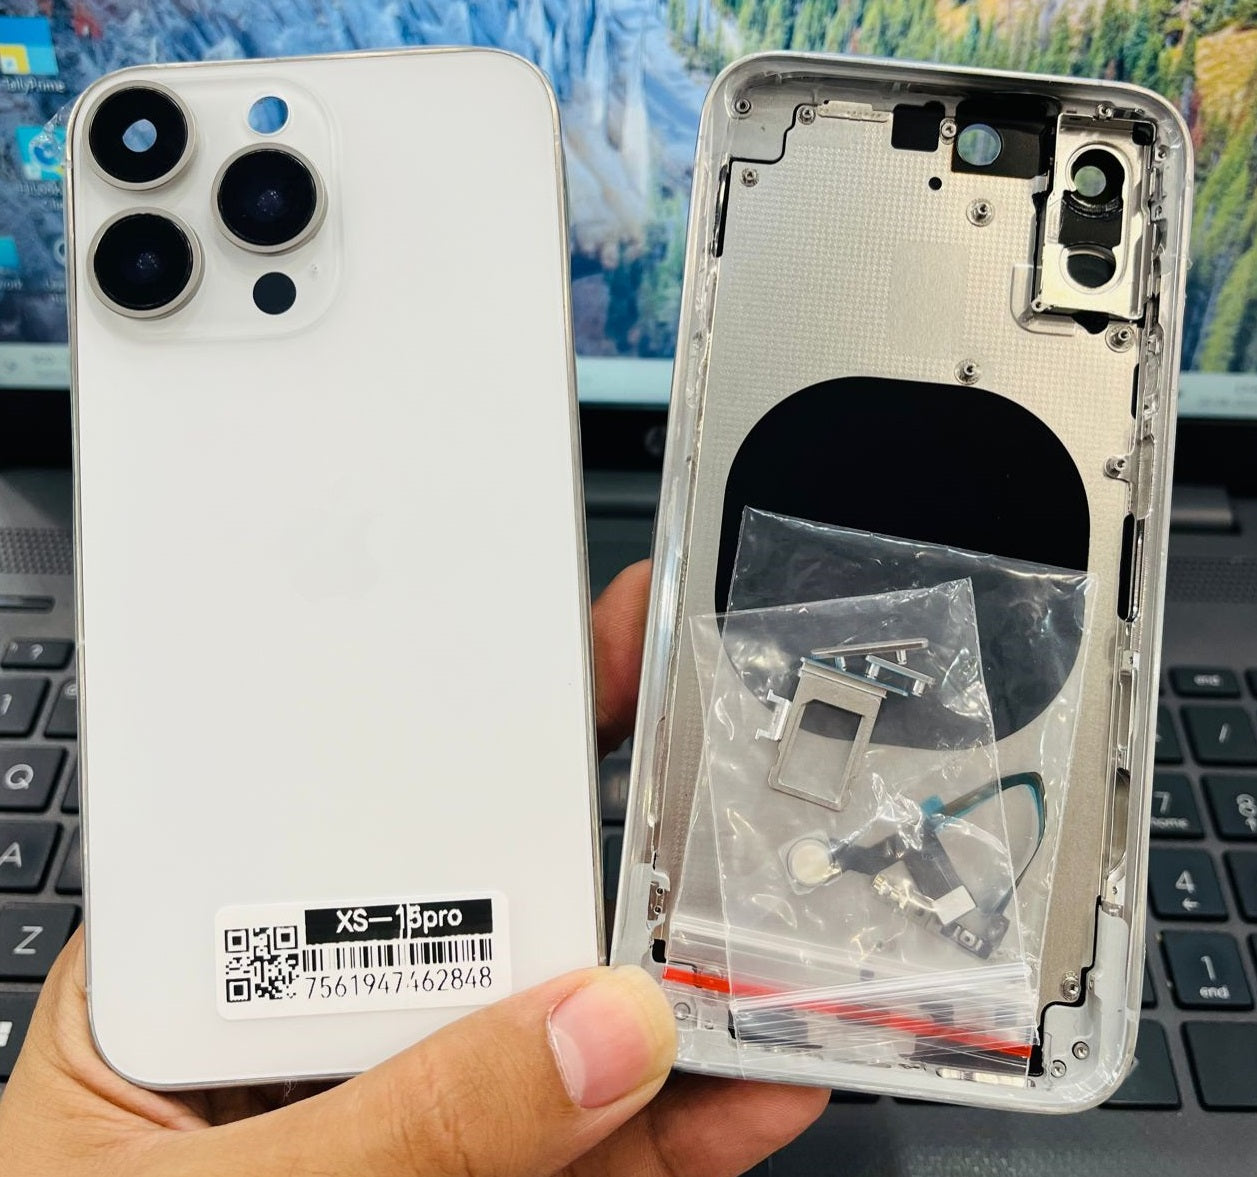 Convertor Back Panel Housing Body for Apple iPhone XR Convert to Apple iPhone 15 Pro